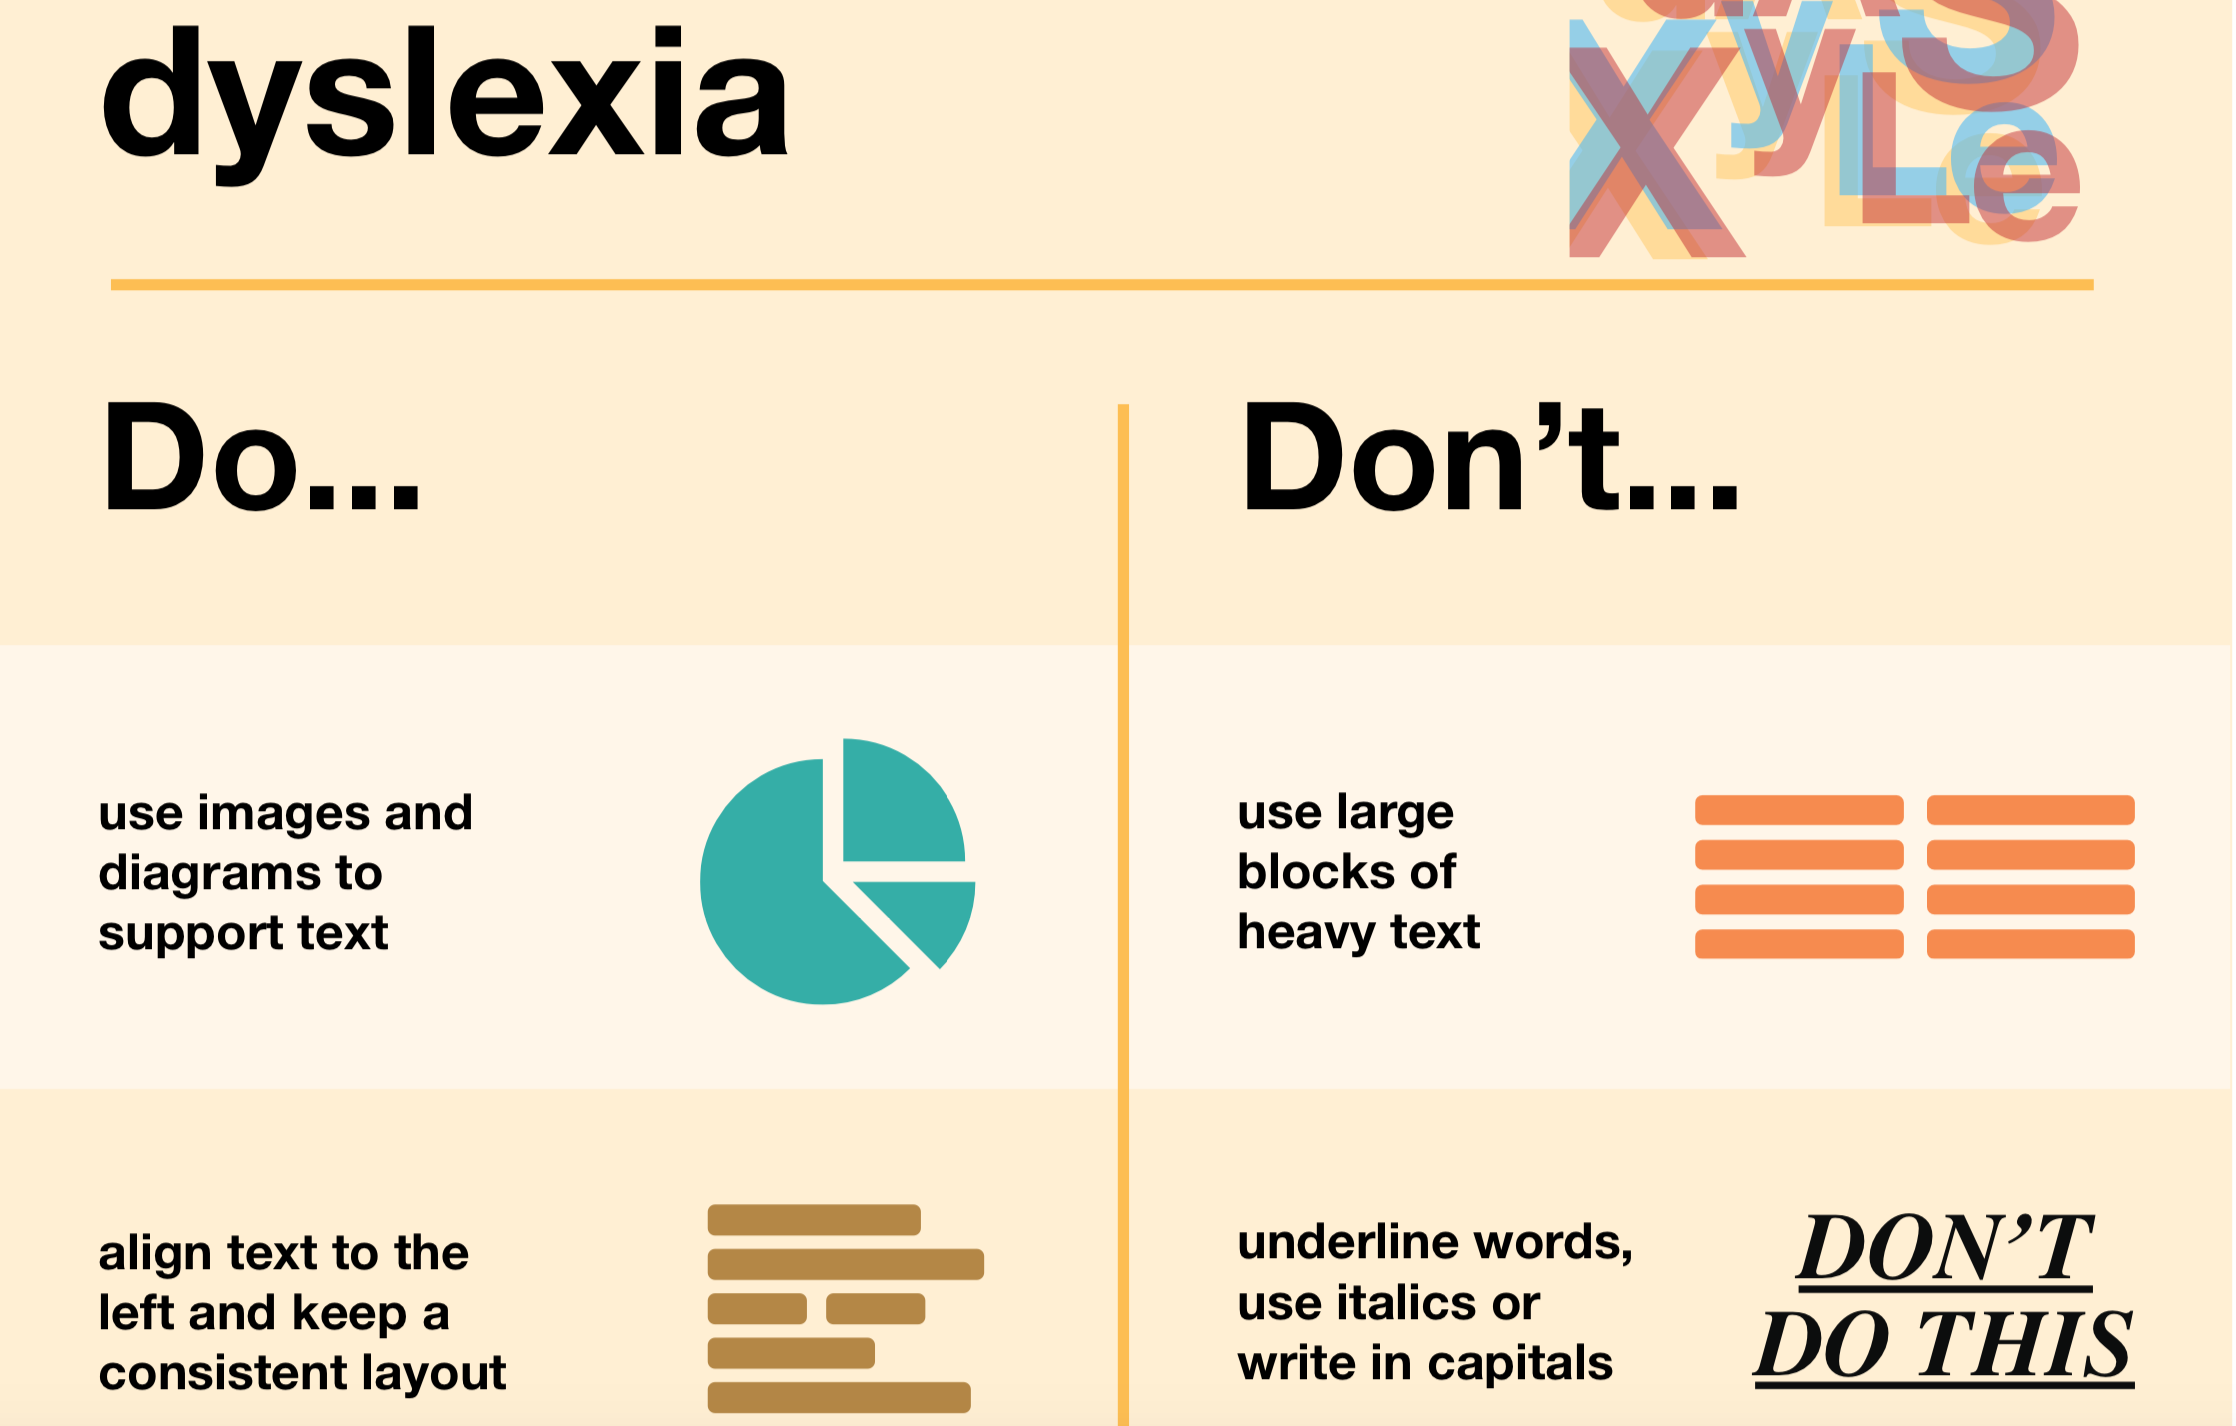 dyslexia accessibility do's and don'ts